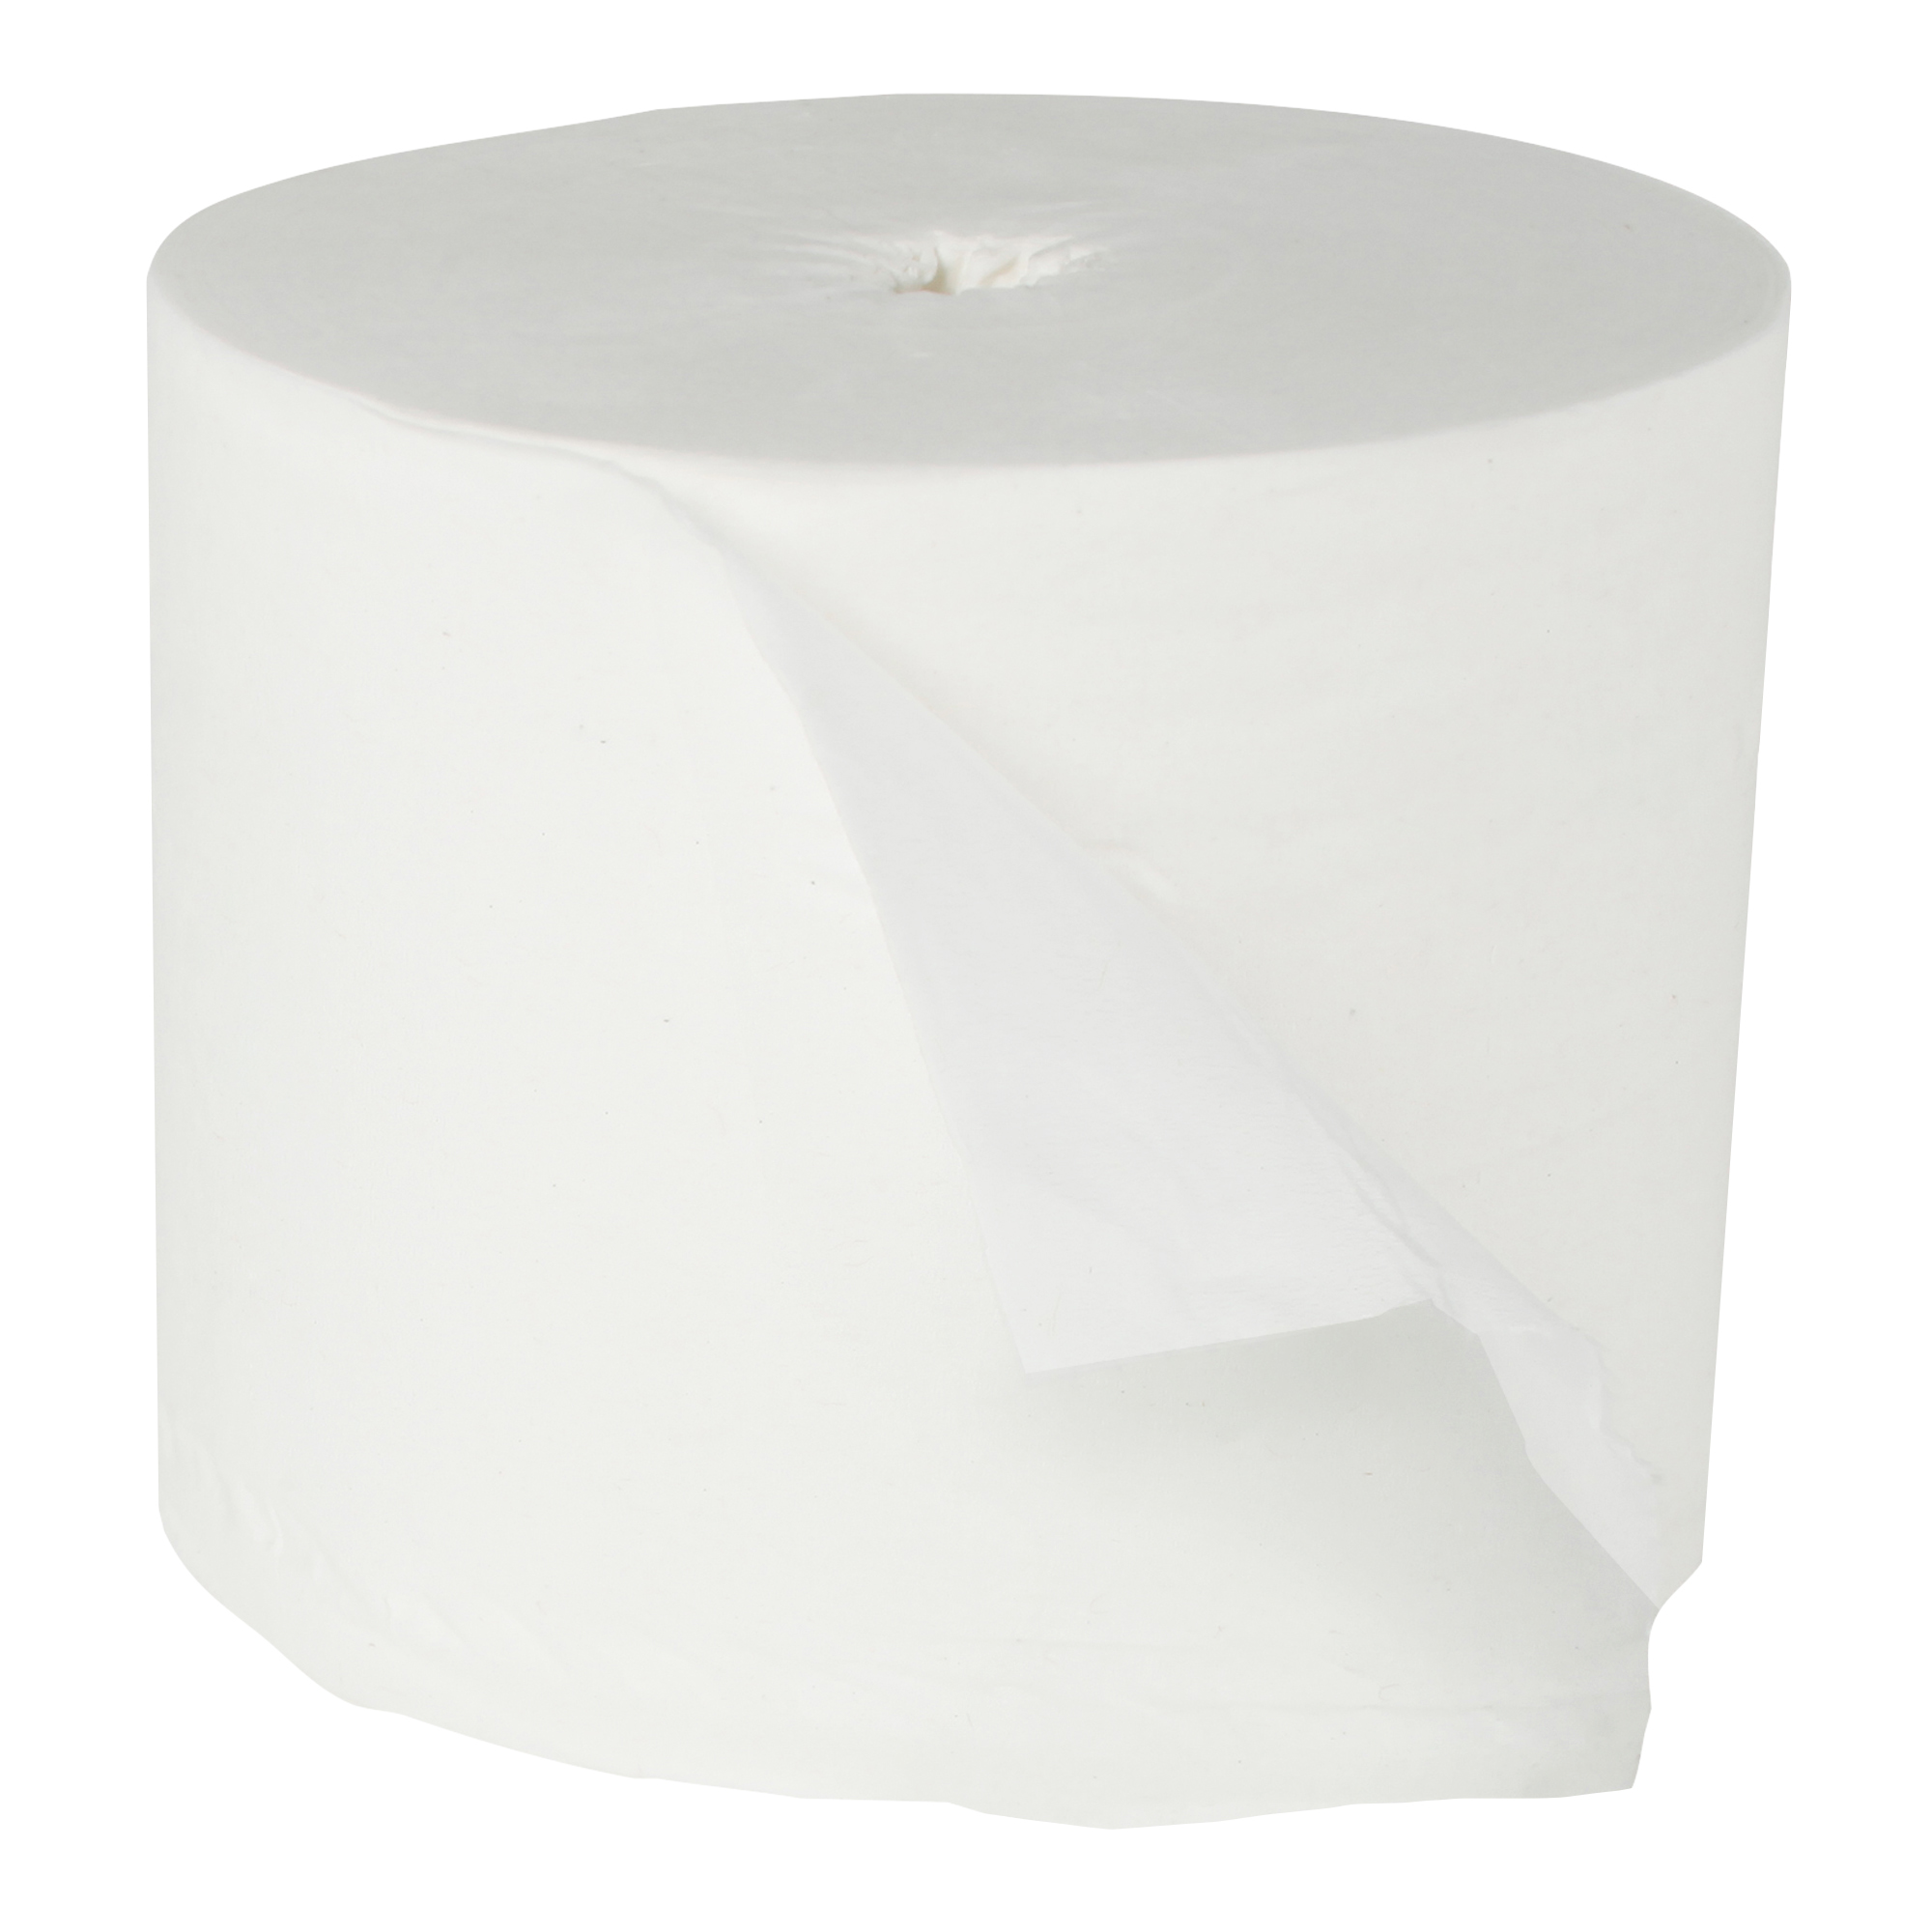 Picture of Essential Extra Soft Coreless Standard Roll Toilet Tissue, Two-Ply, 36 Rolls/Ct, 800 Sheets per roll